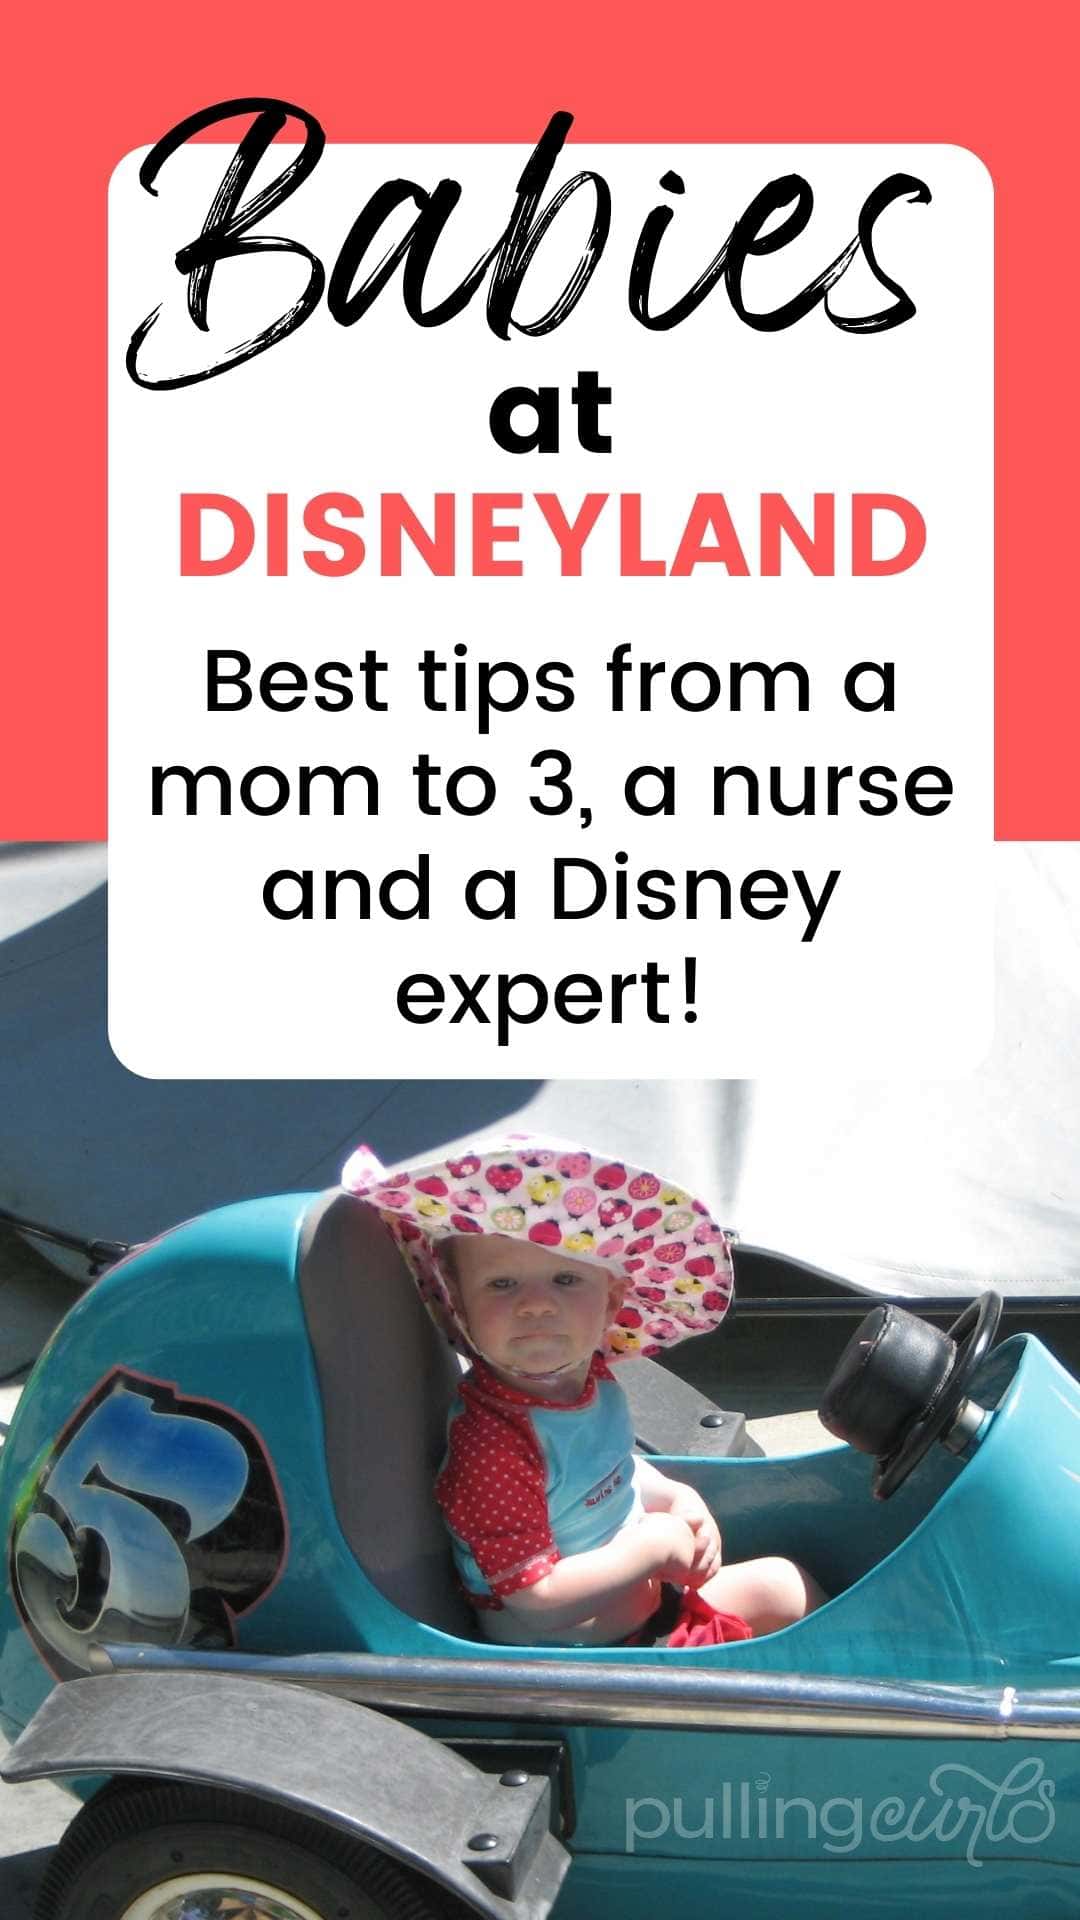 If you're pregnant, the last thing on your mind is probably going to Disneyland. But what about once your baby is born? If you wait until they're a bit older, you can enjoy some of the rides together! Here are five of the BEST Disneyland rides for infants. via @pullingcurls